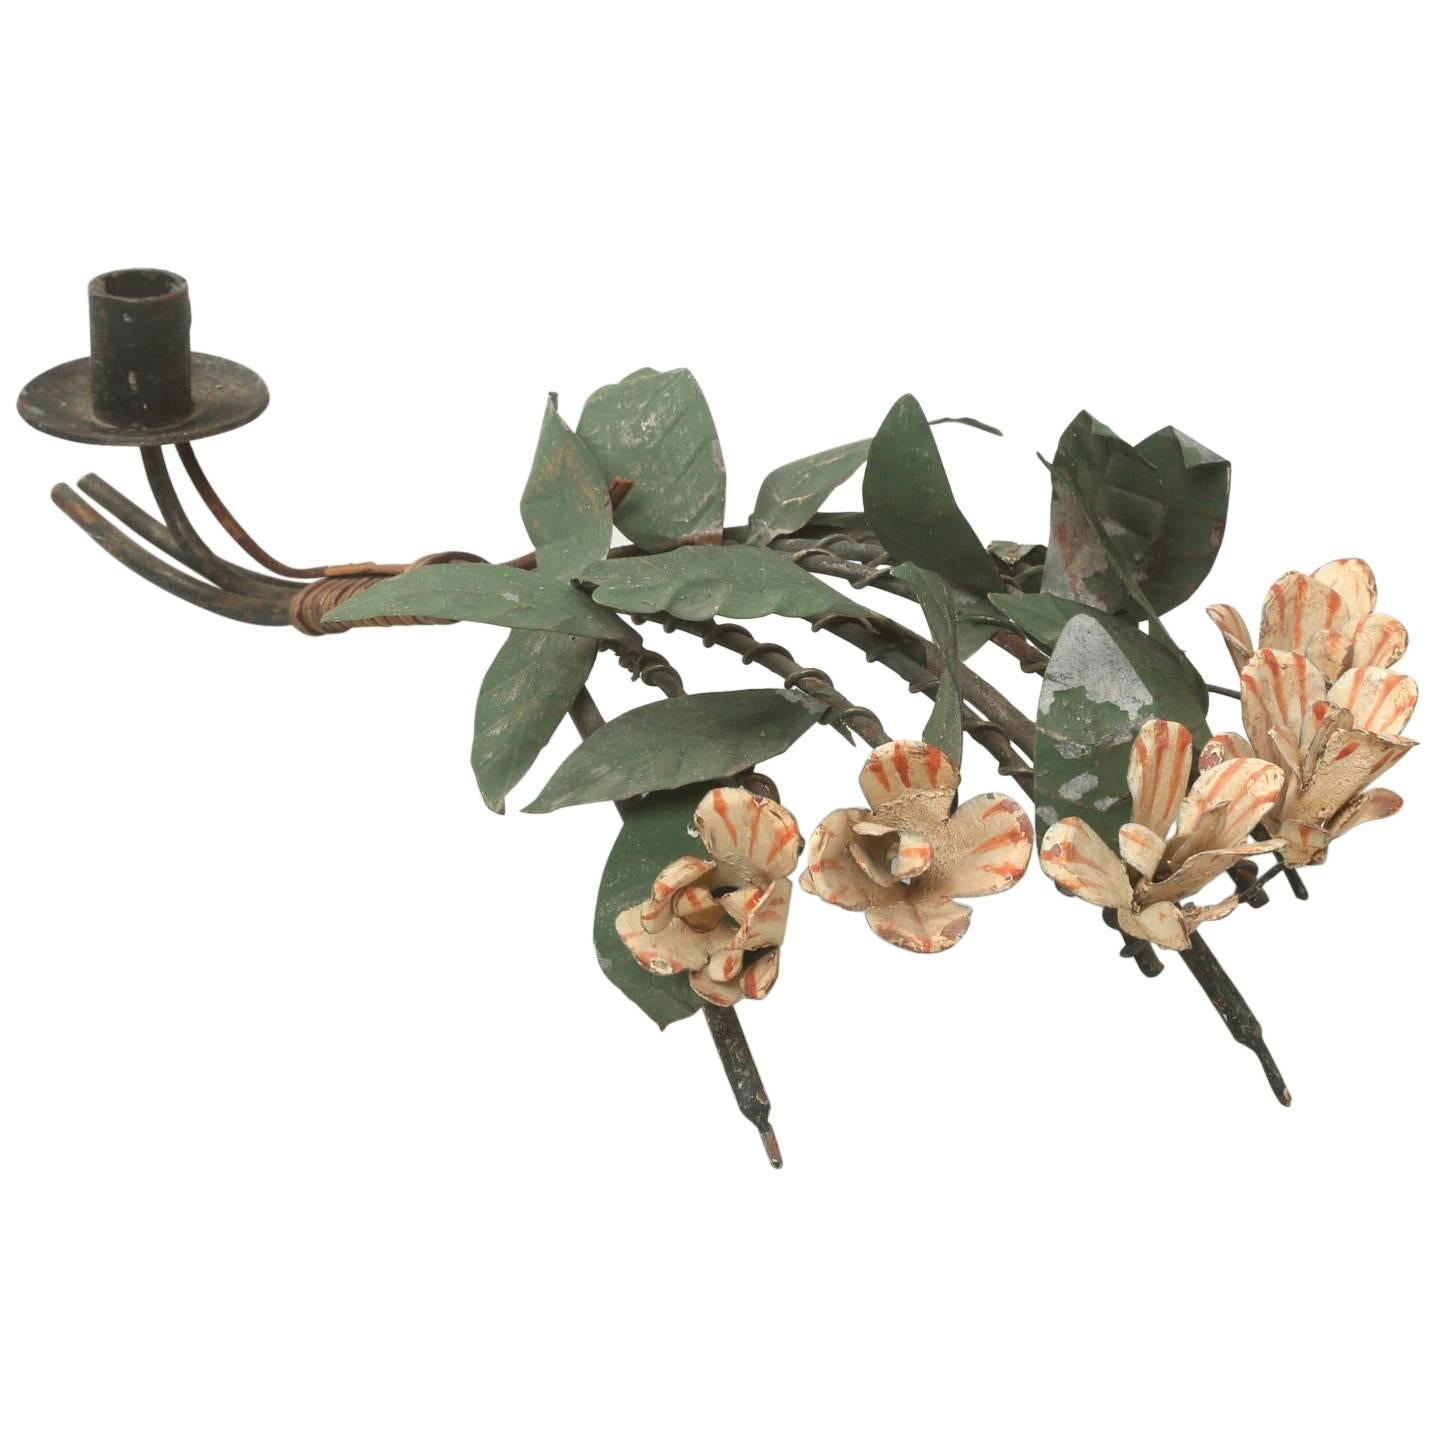 Candleholder or Floral Centrepiece for Indoors or Outdoors For Sale